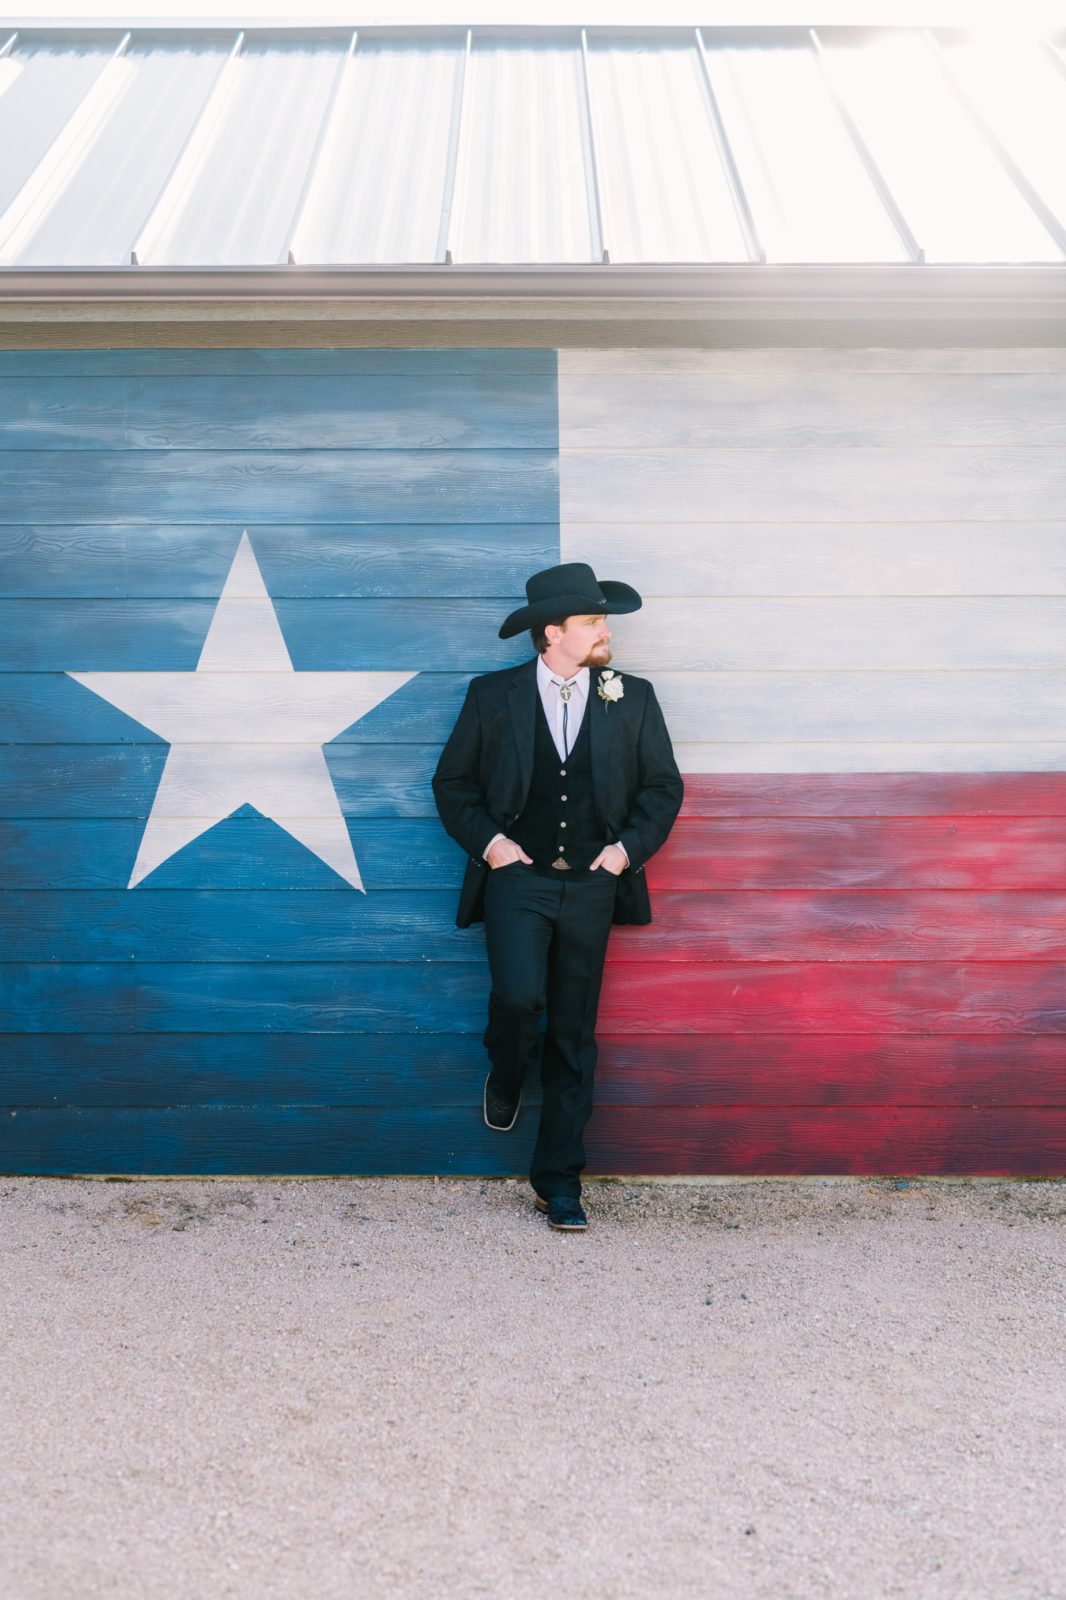 Groom wearing black cowboy attire for a wedding is in front of the Texas flag by Christina Elliott Photography. texas groom #ChristinaElliottPhotography #ChristinaElliottWeddings #StillWatersRanchWedding #Texasweddings #countrywedding #ranchwedding